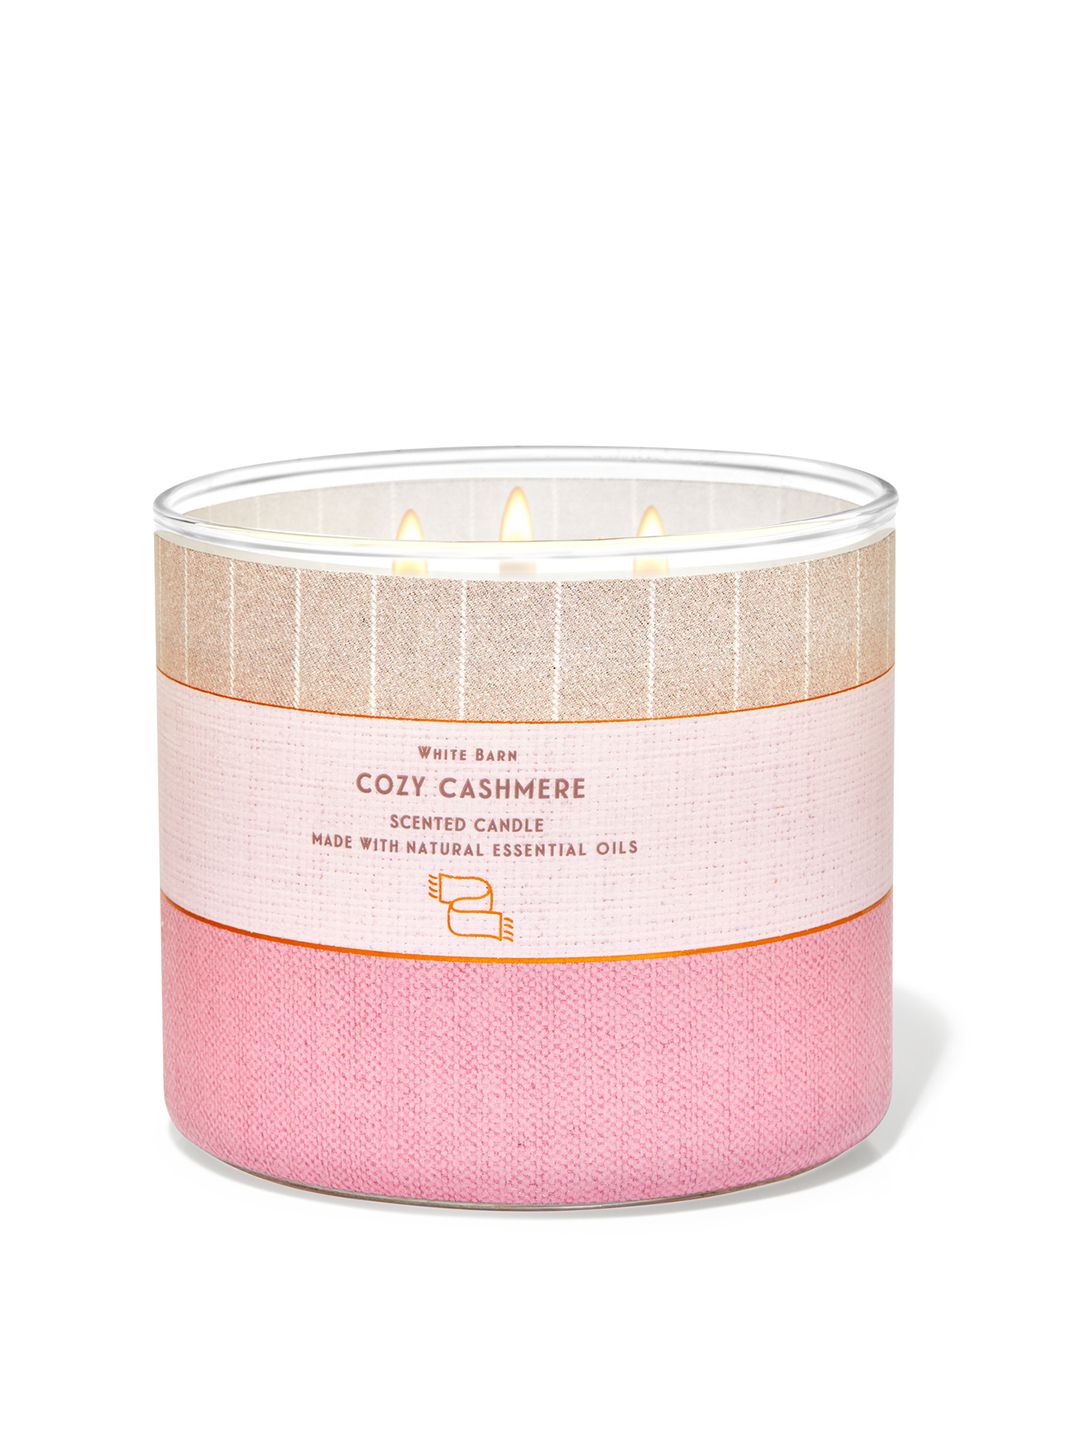 Bath & Body Works White Barn Cozy Cashmere 3-Wick Scented Candle with Essential Oils- 411g Price in India